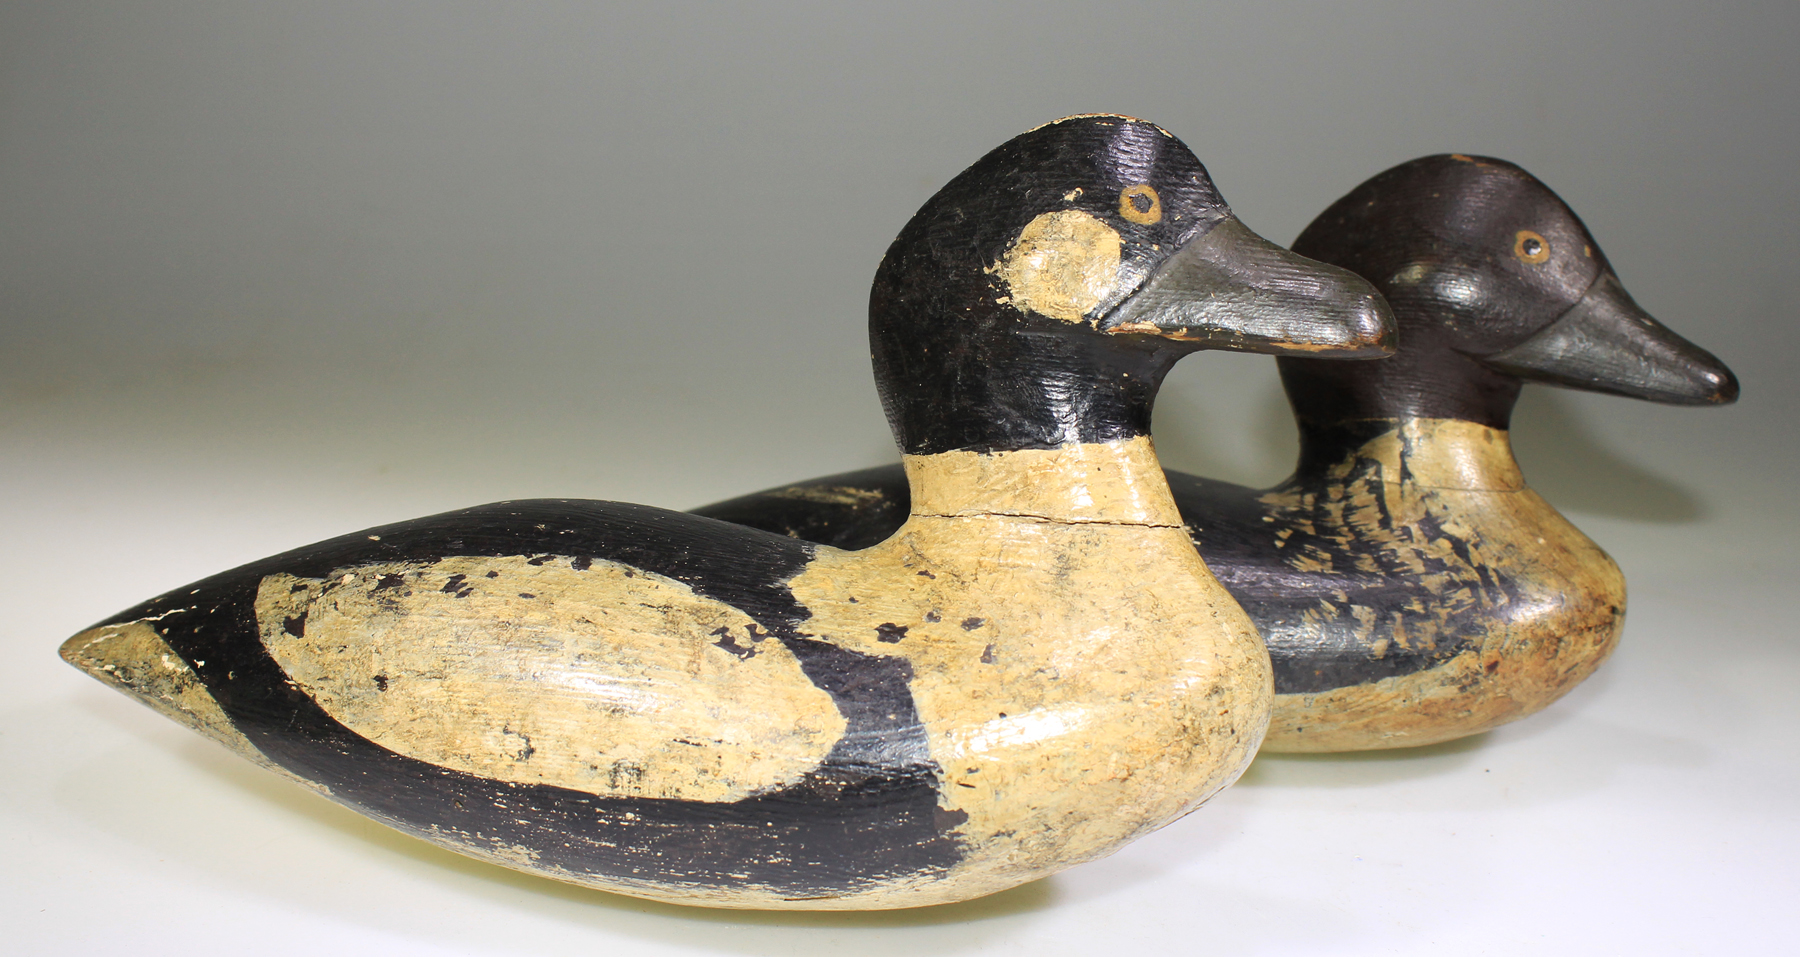 NICE PAIR OF GOLDENEYE DECOYS CARVED BY SAM HUTCHINS